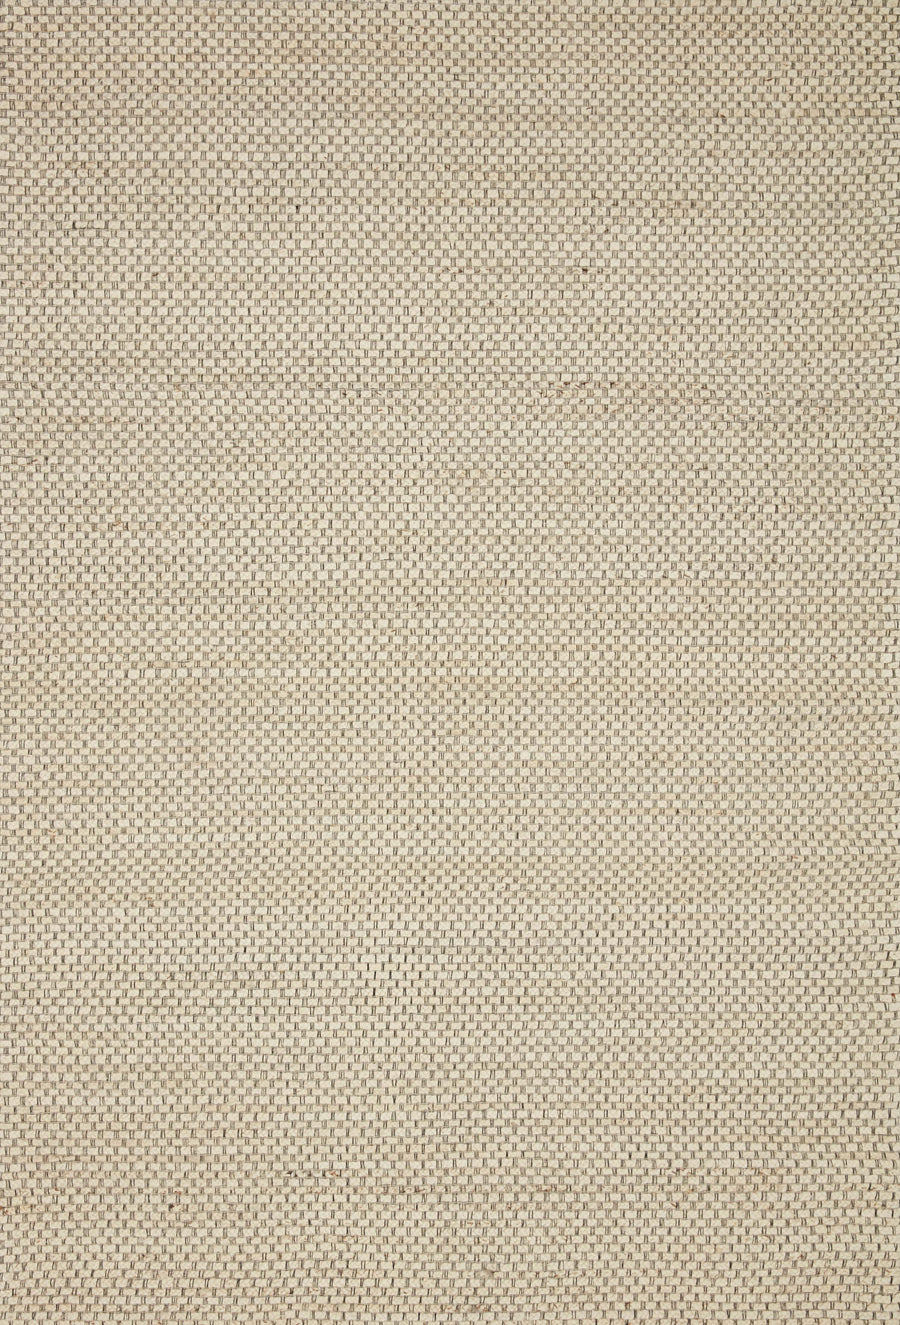 Lily Rug in Ivory